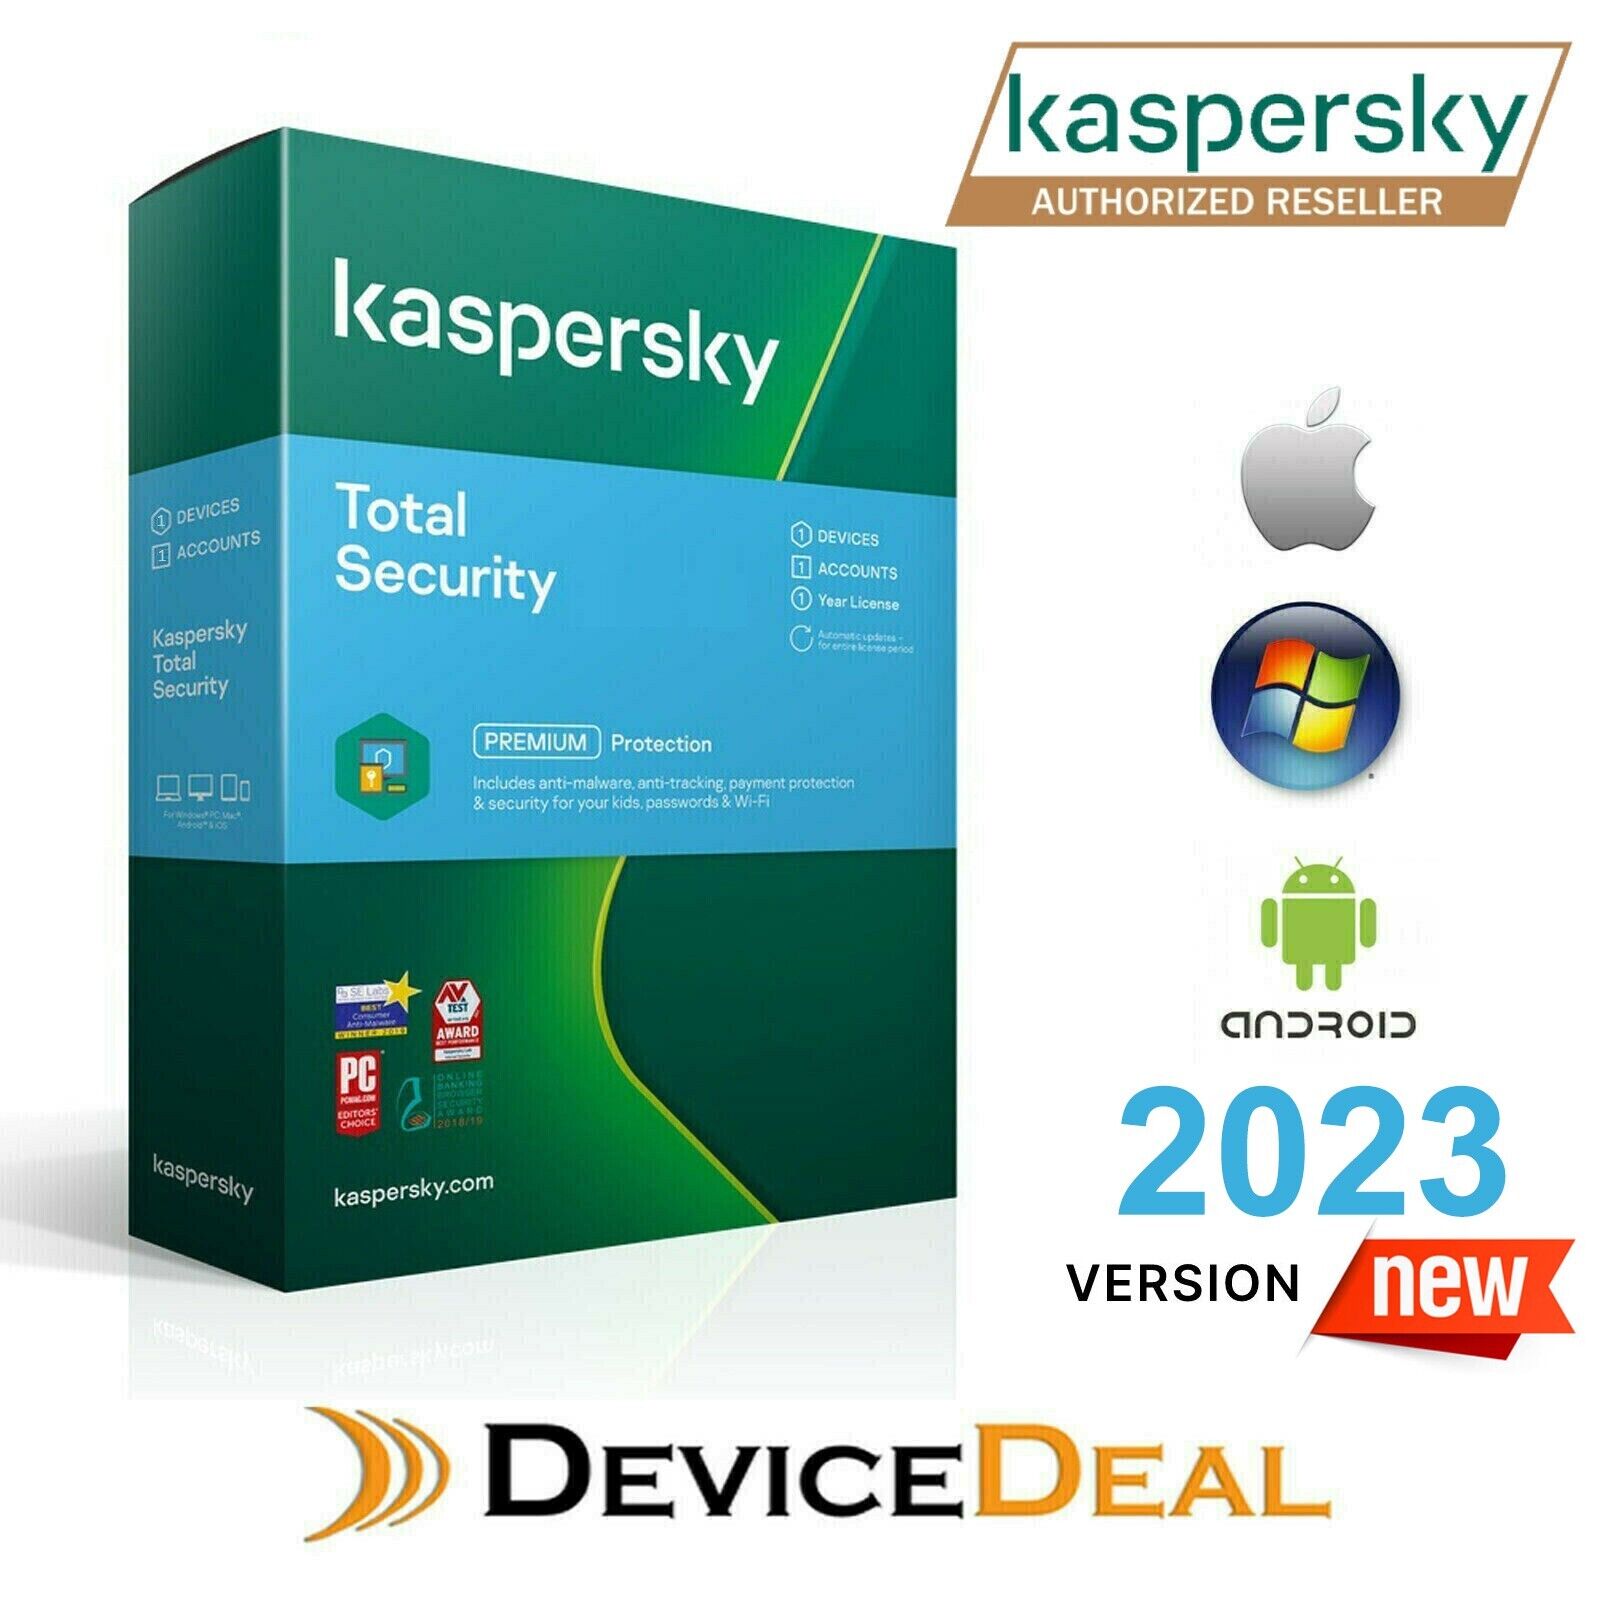 Kaspersky Total Security  Premium 1 Device 1 Year License Key 2023 By Email